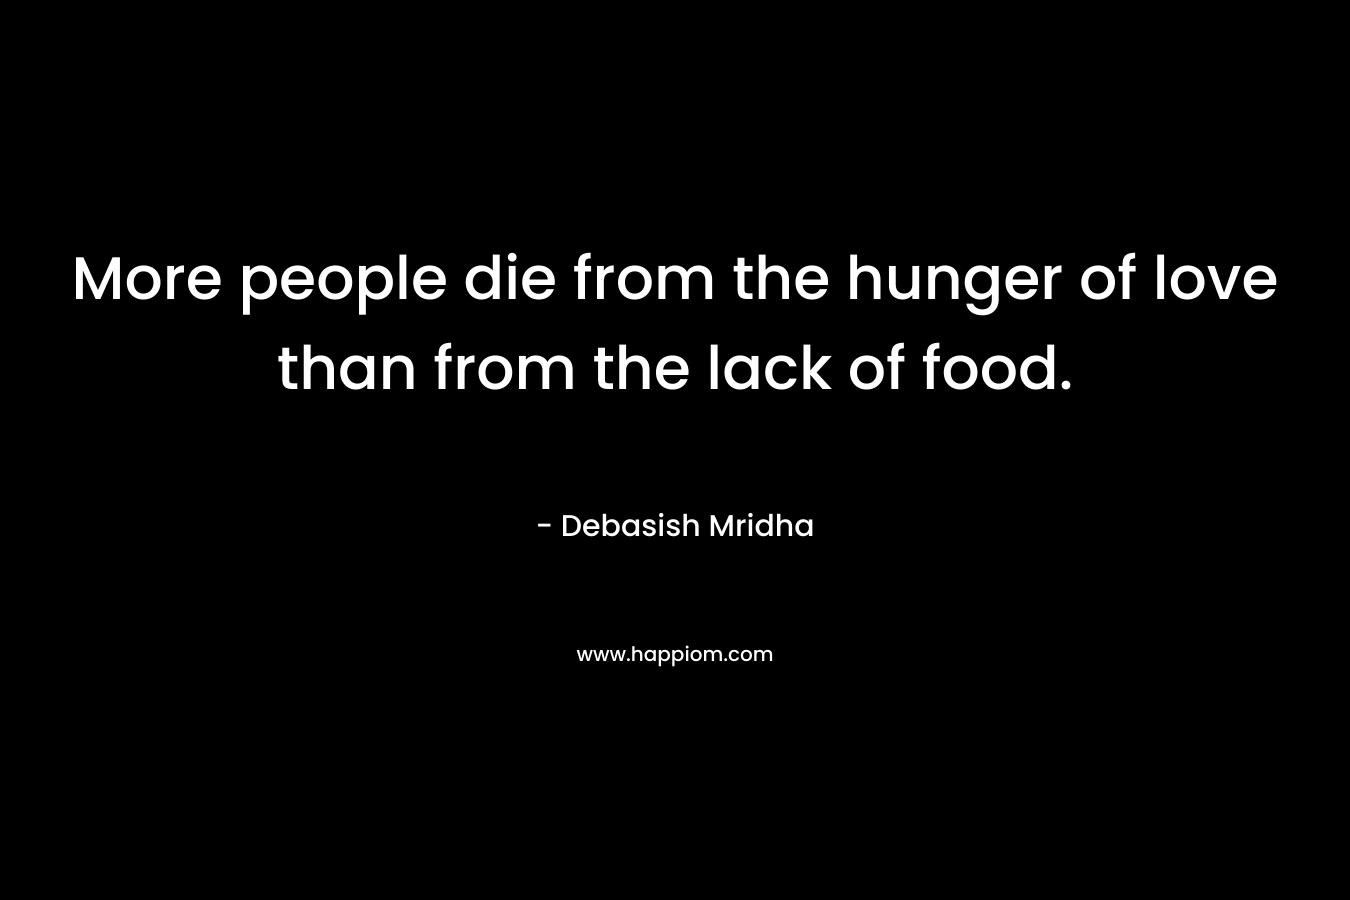 More people die from the hunger of love than from the lack of food.